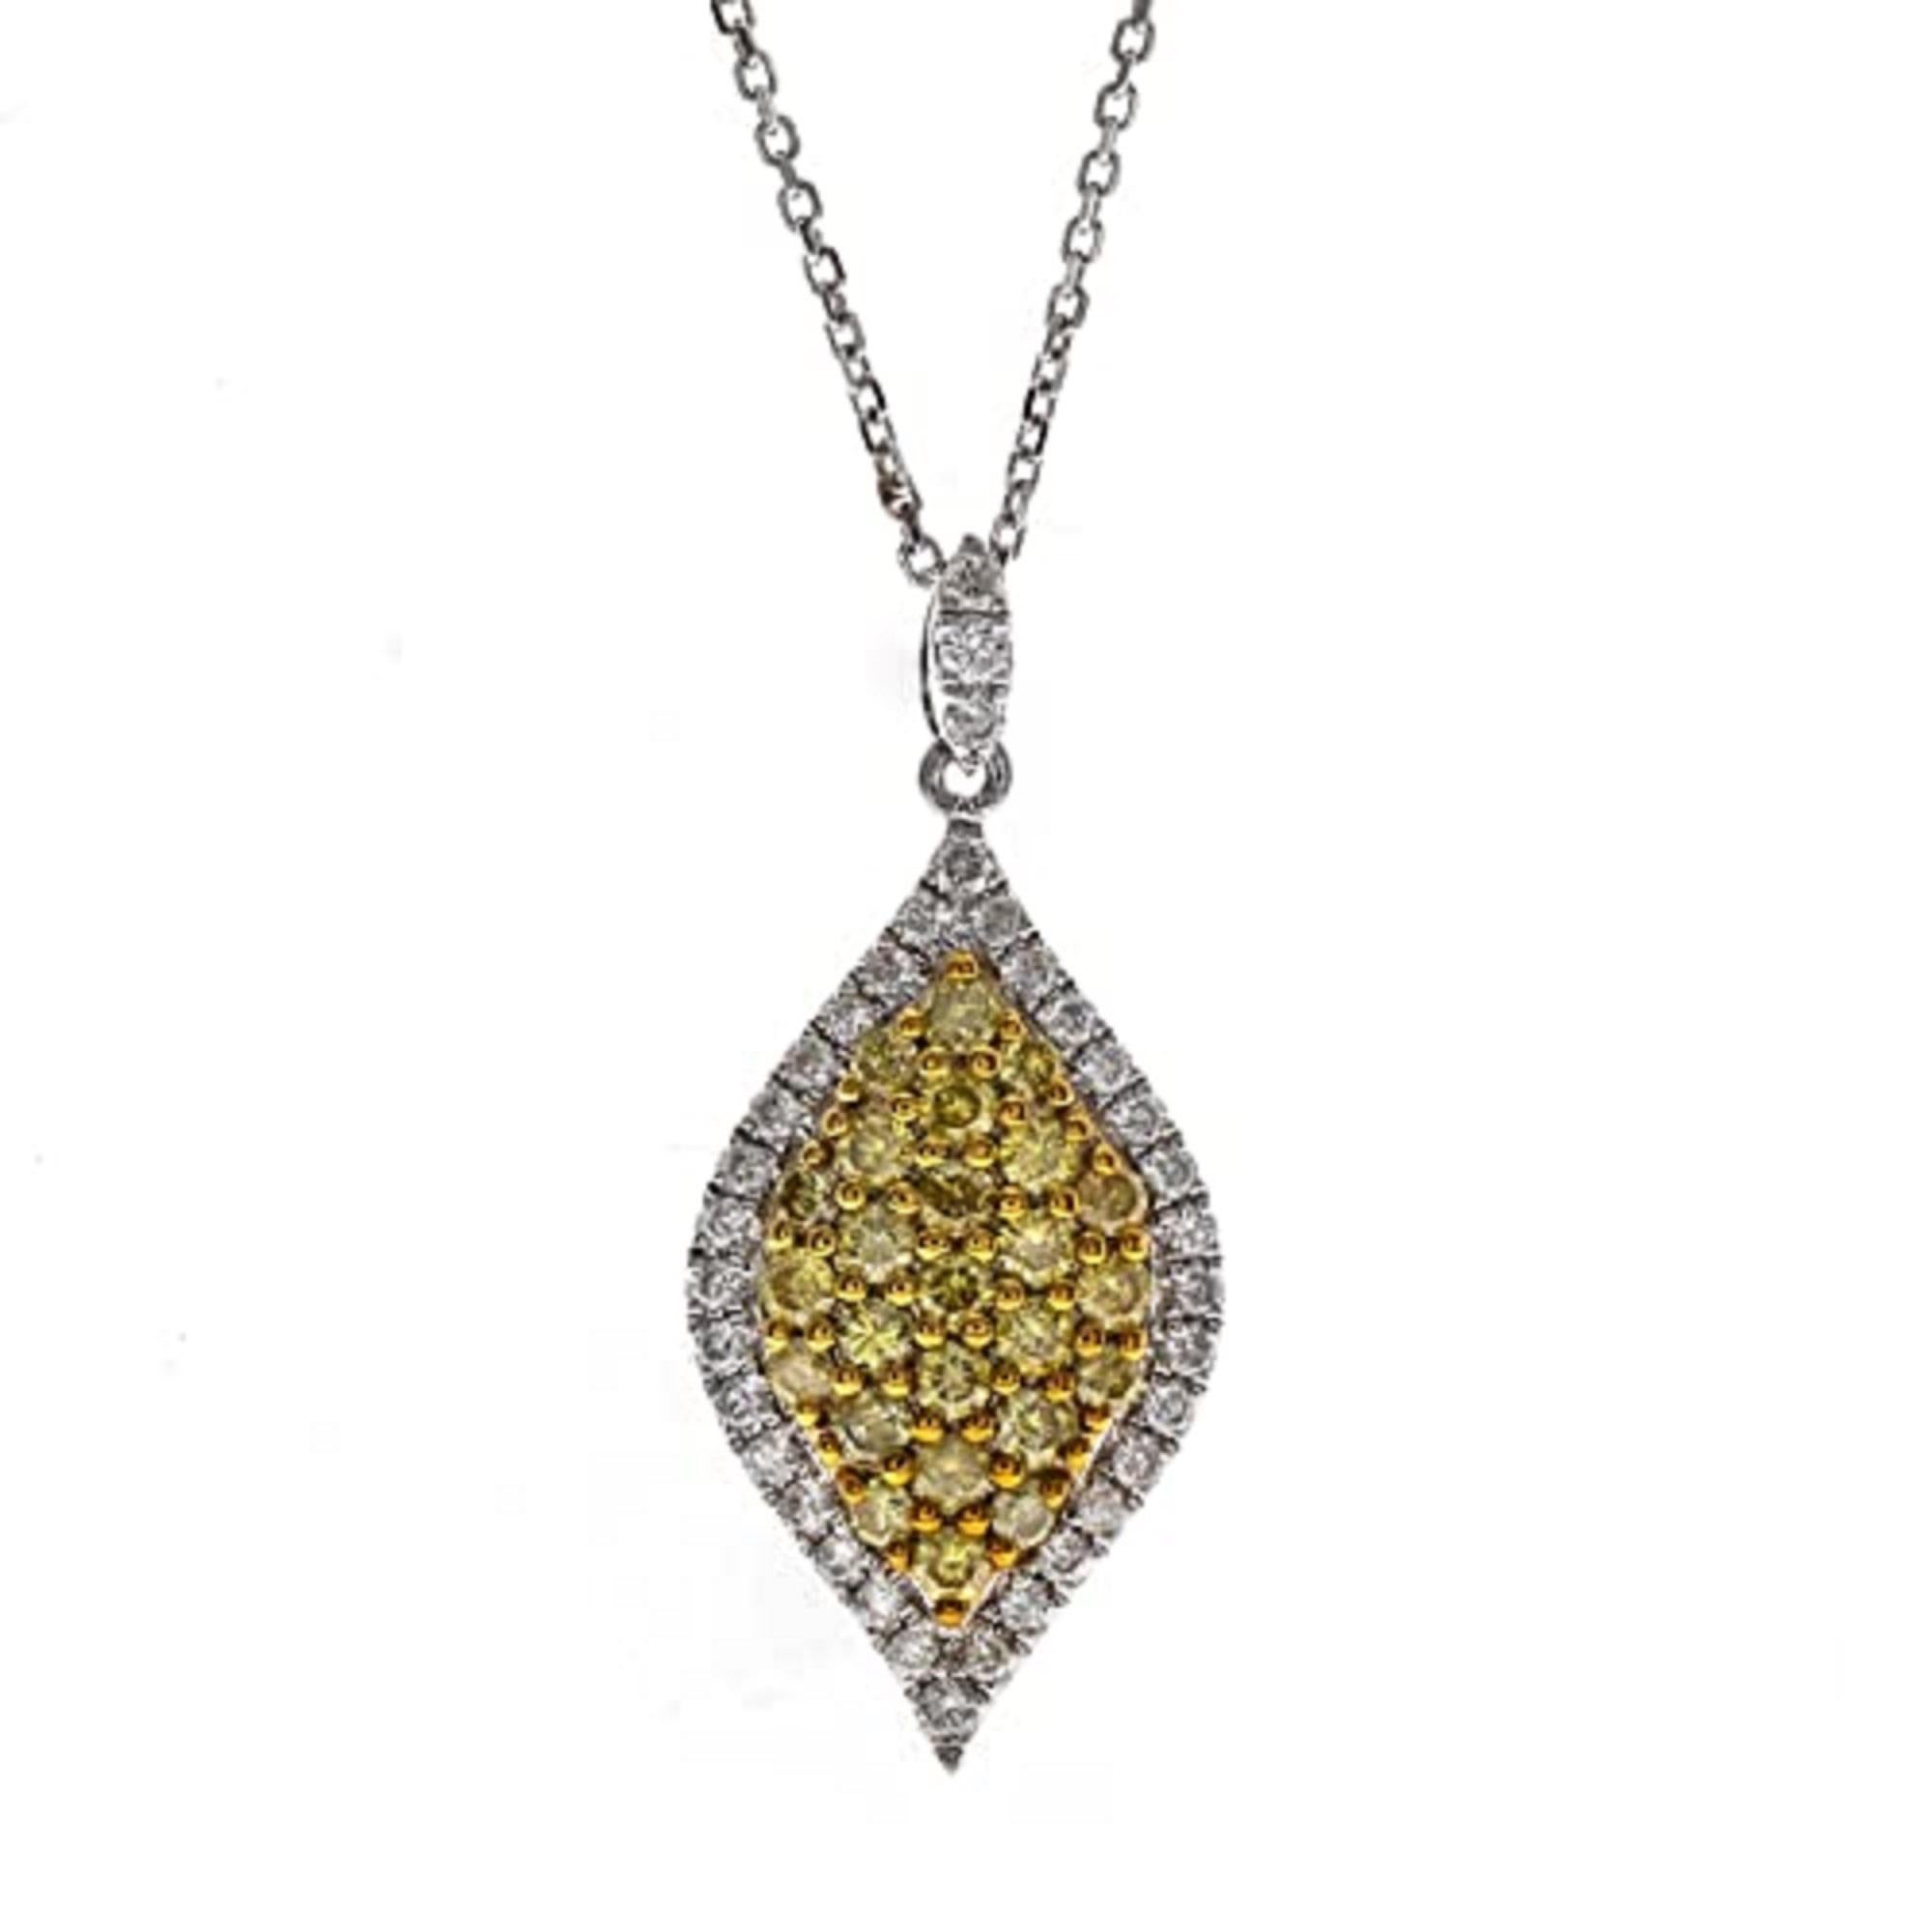 Decorate yourself in elegance with this Pendant is crafted from 14-karat Two-Tone Gold by Gin & Grace. This Pendant is Round-cut Yellow Diamond (25 Pcs) 0.83 Carat and Round-cut White Diamond (39 Pcs) 0.49 Carat. This Pendant is weight 3.93 grams